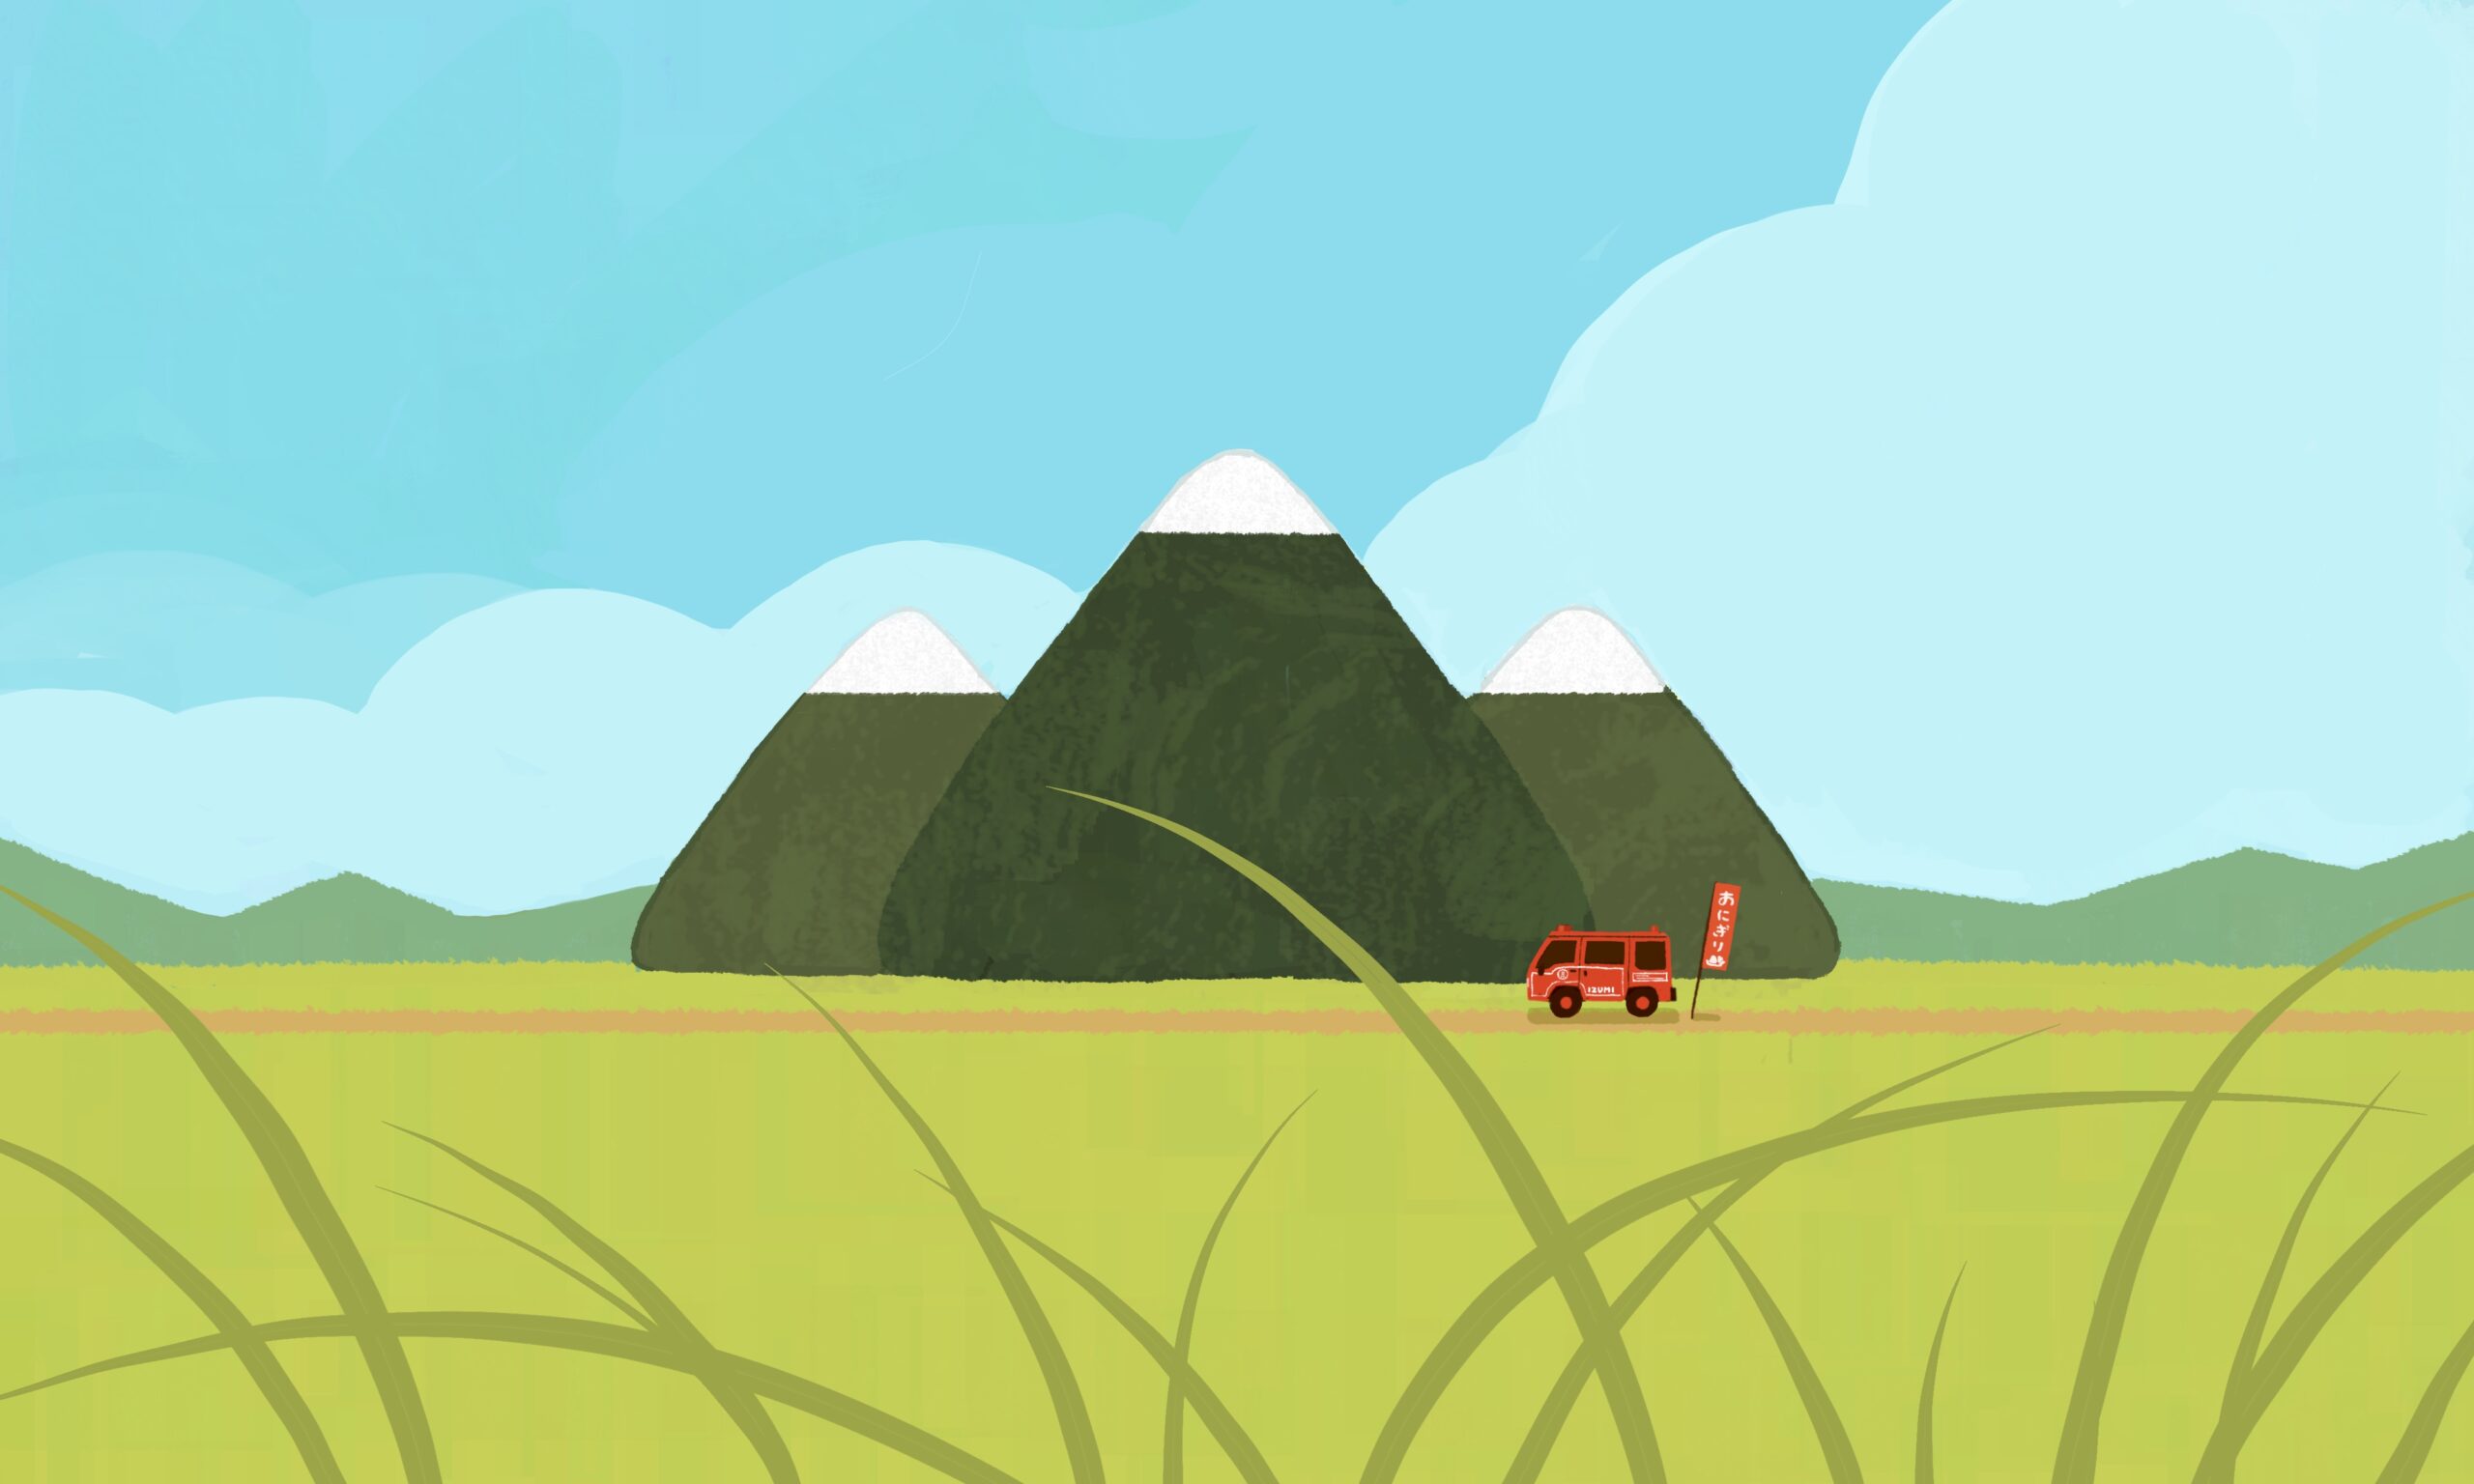 Three giant onigiris sit in the center of a grassy landscape. A far off mountain range and large clouds into the distance of a bright blue sky. A Japanese fire truck with the words Izumi written on it sits on a road in front of the onigiris.<br />
